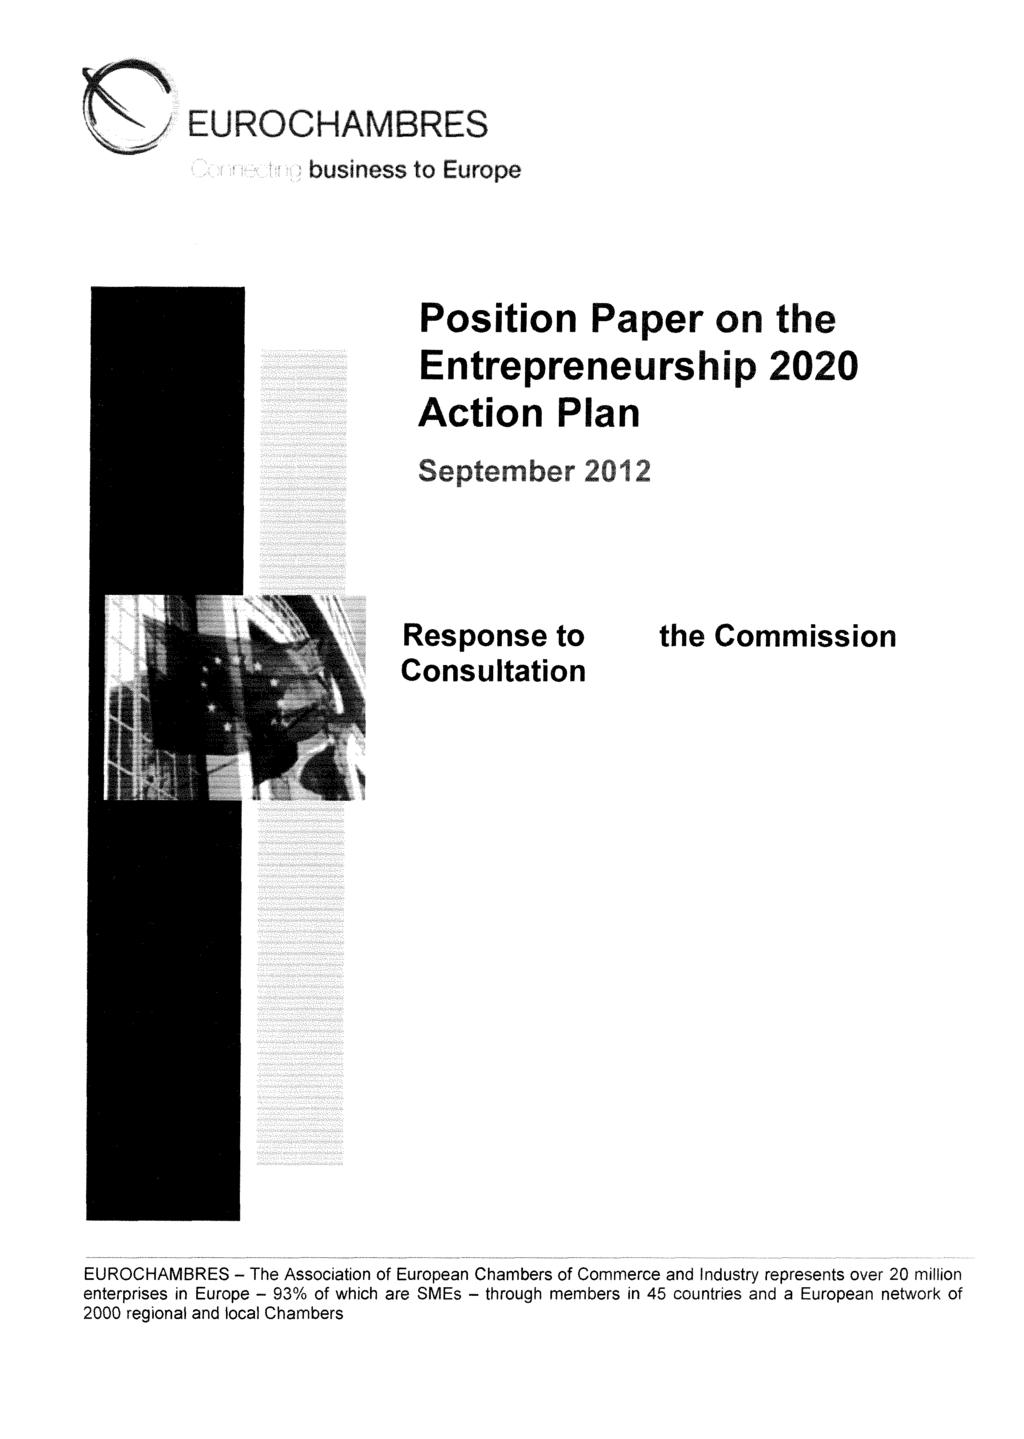 Ref. Ares(2015)2101553-20/05/2015 - j EUROCHAMBRES i : и : business to Europe Position Paper on the Entrepreneurship 2020 Action Plan September 2012 Response to Consultation the Commission -.